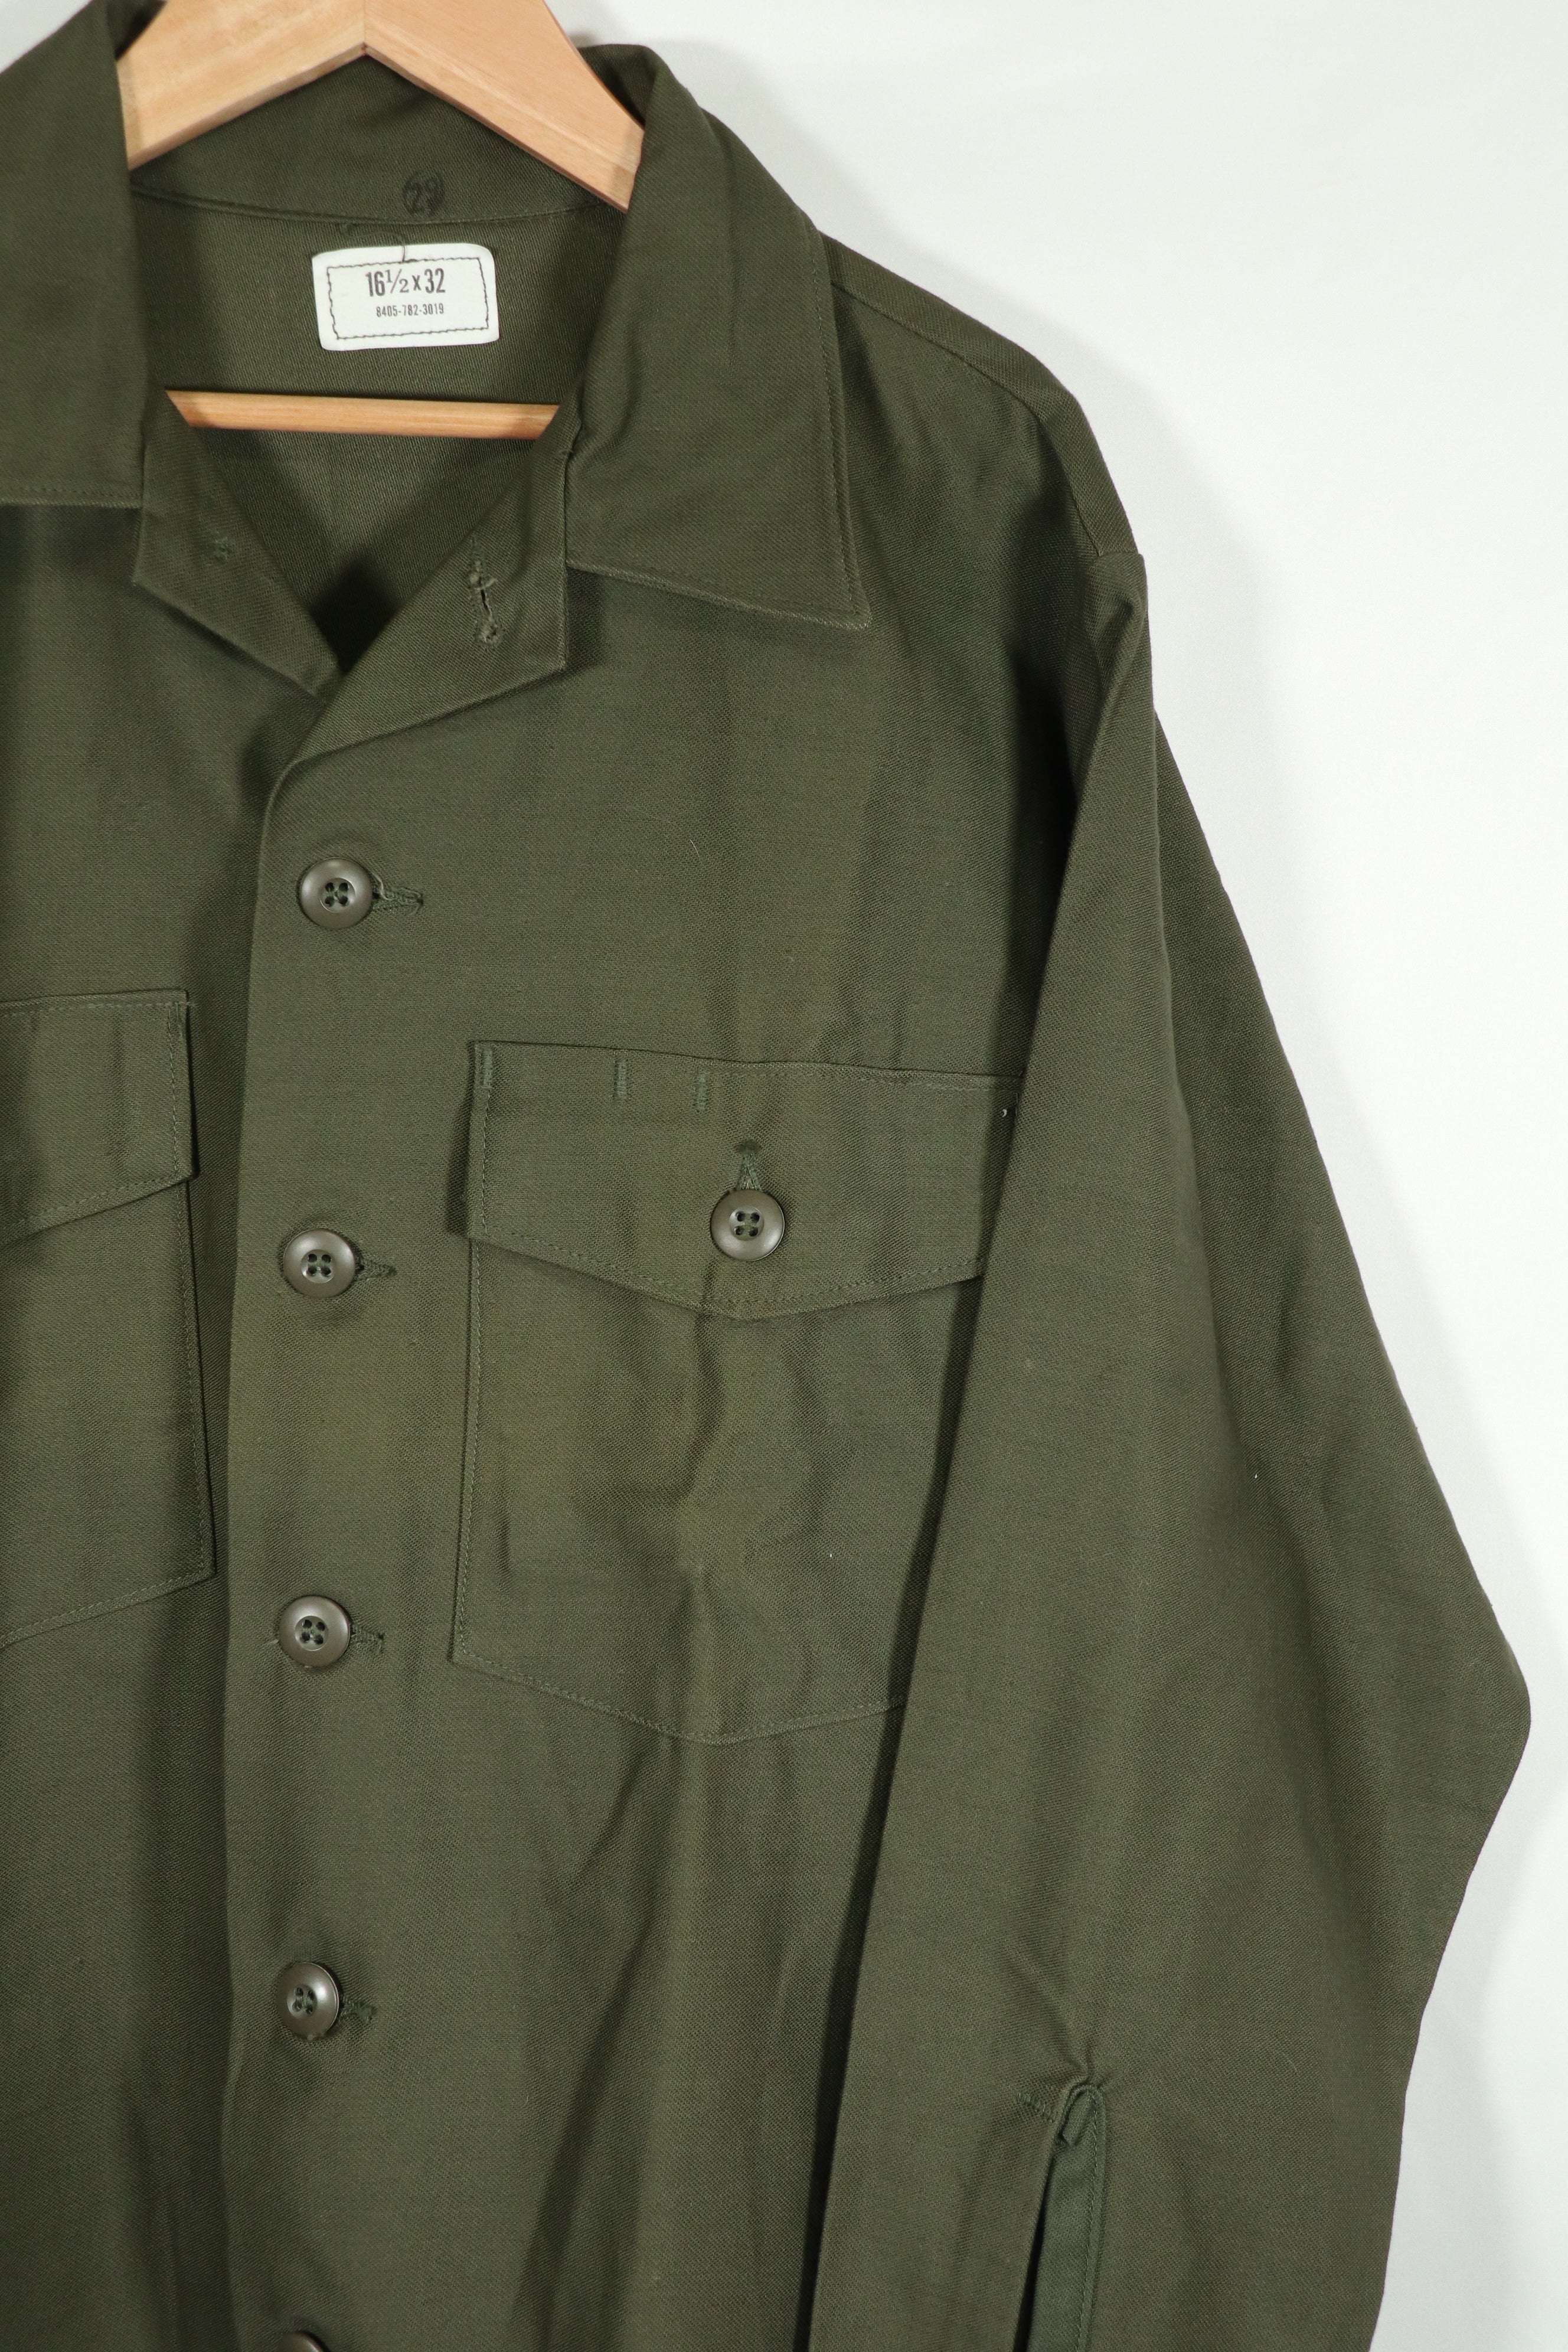 Actual 1974 OG-107 utility shirt, deadstock, 161/2 32, large size.